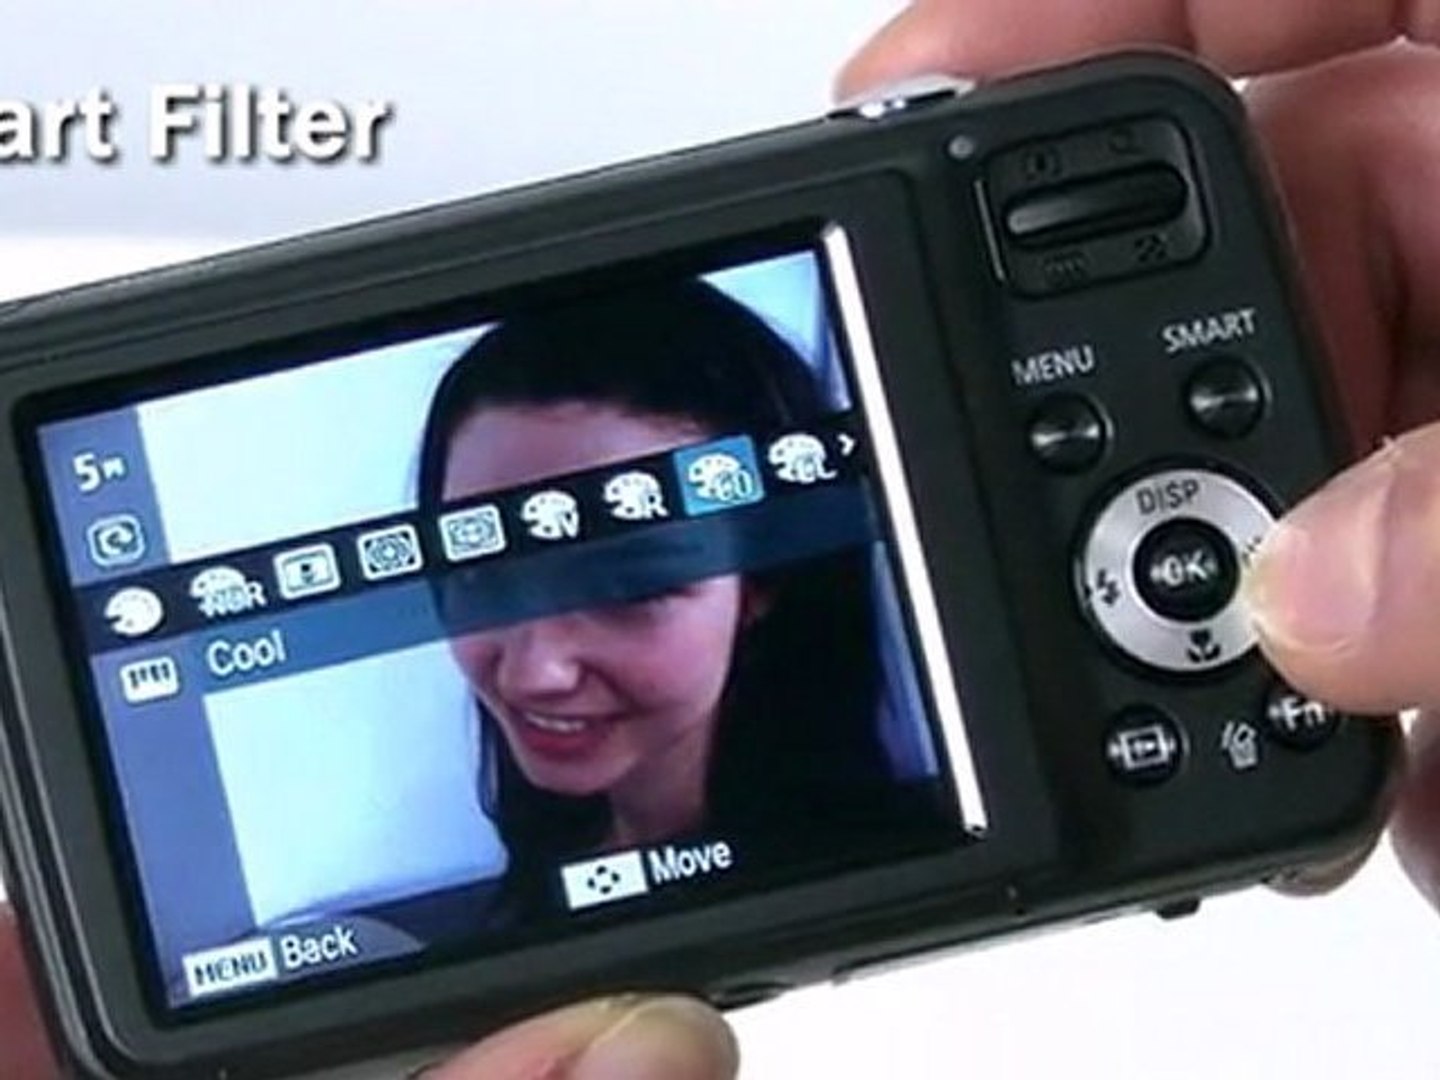 Samsung PL20 Compact Digital Camera Review - video Dailymotion